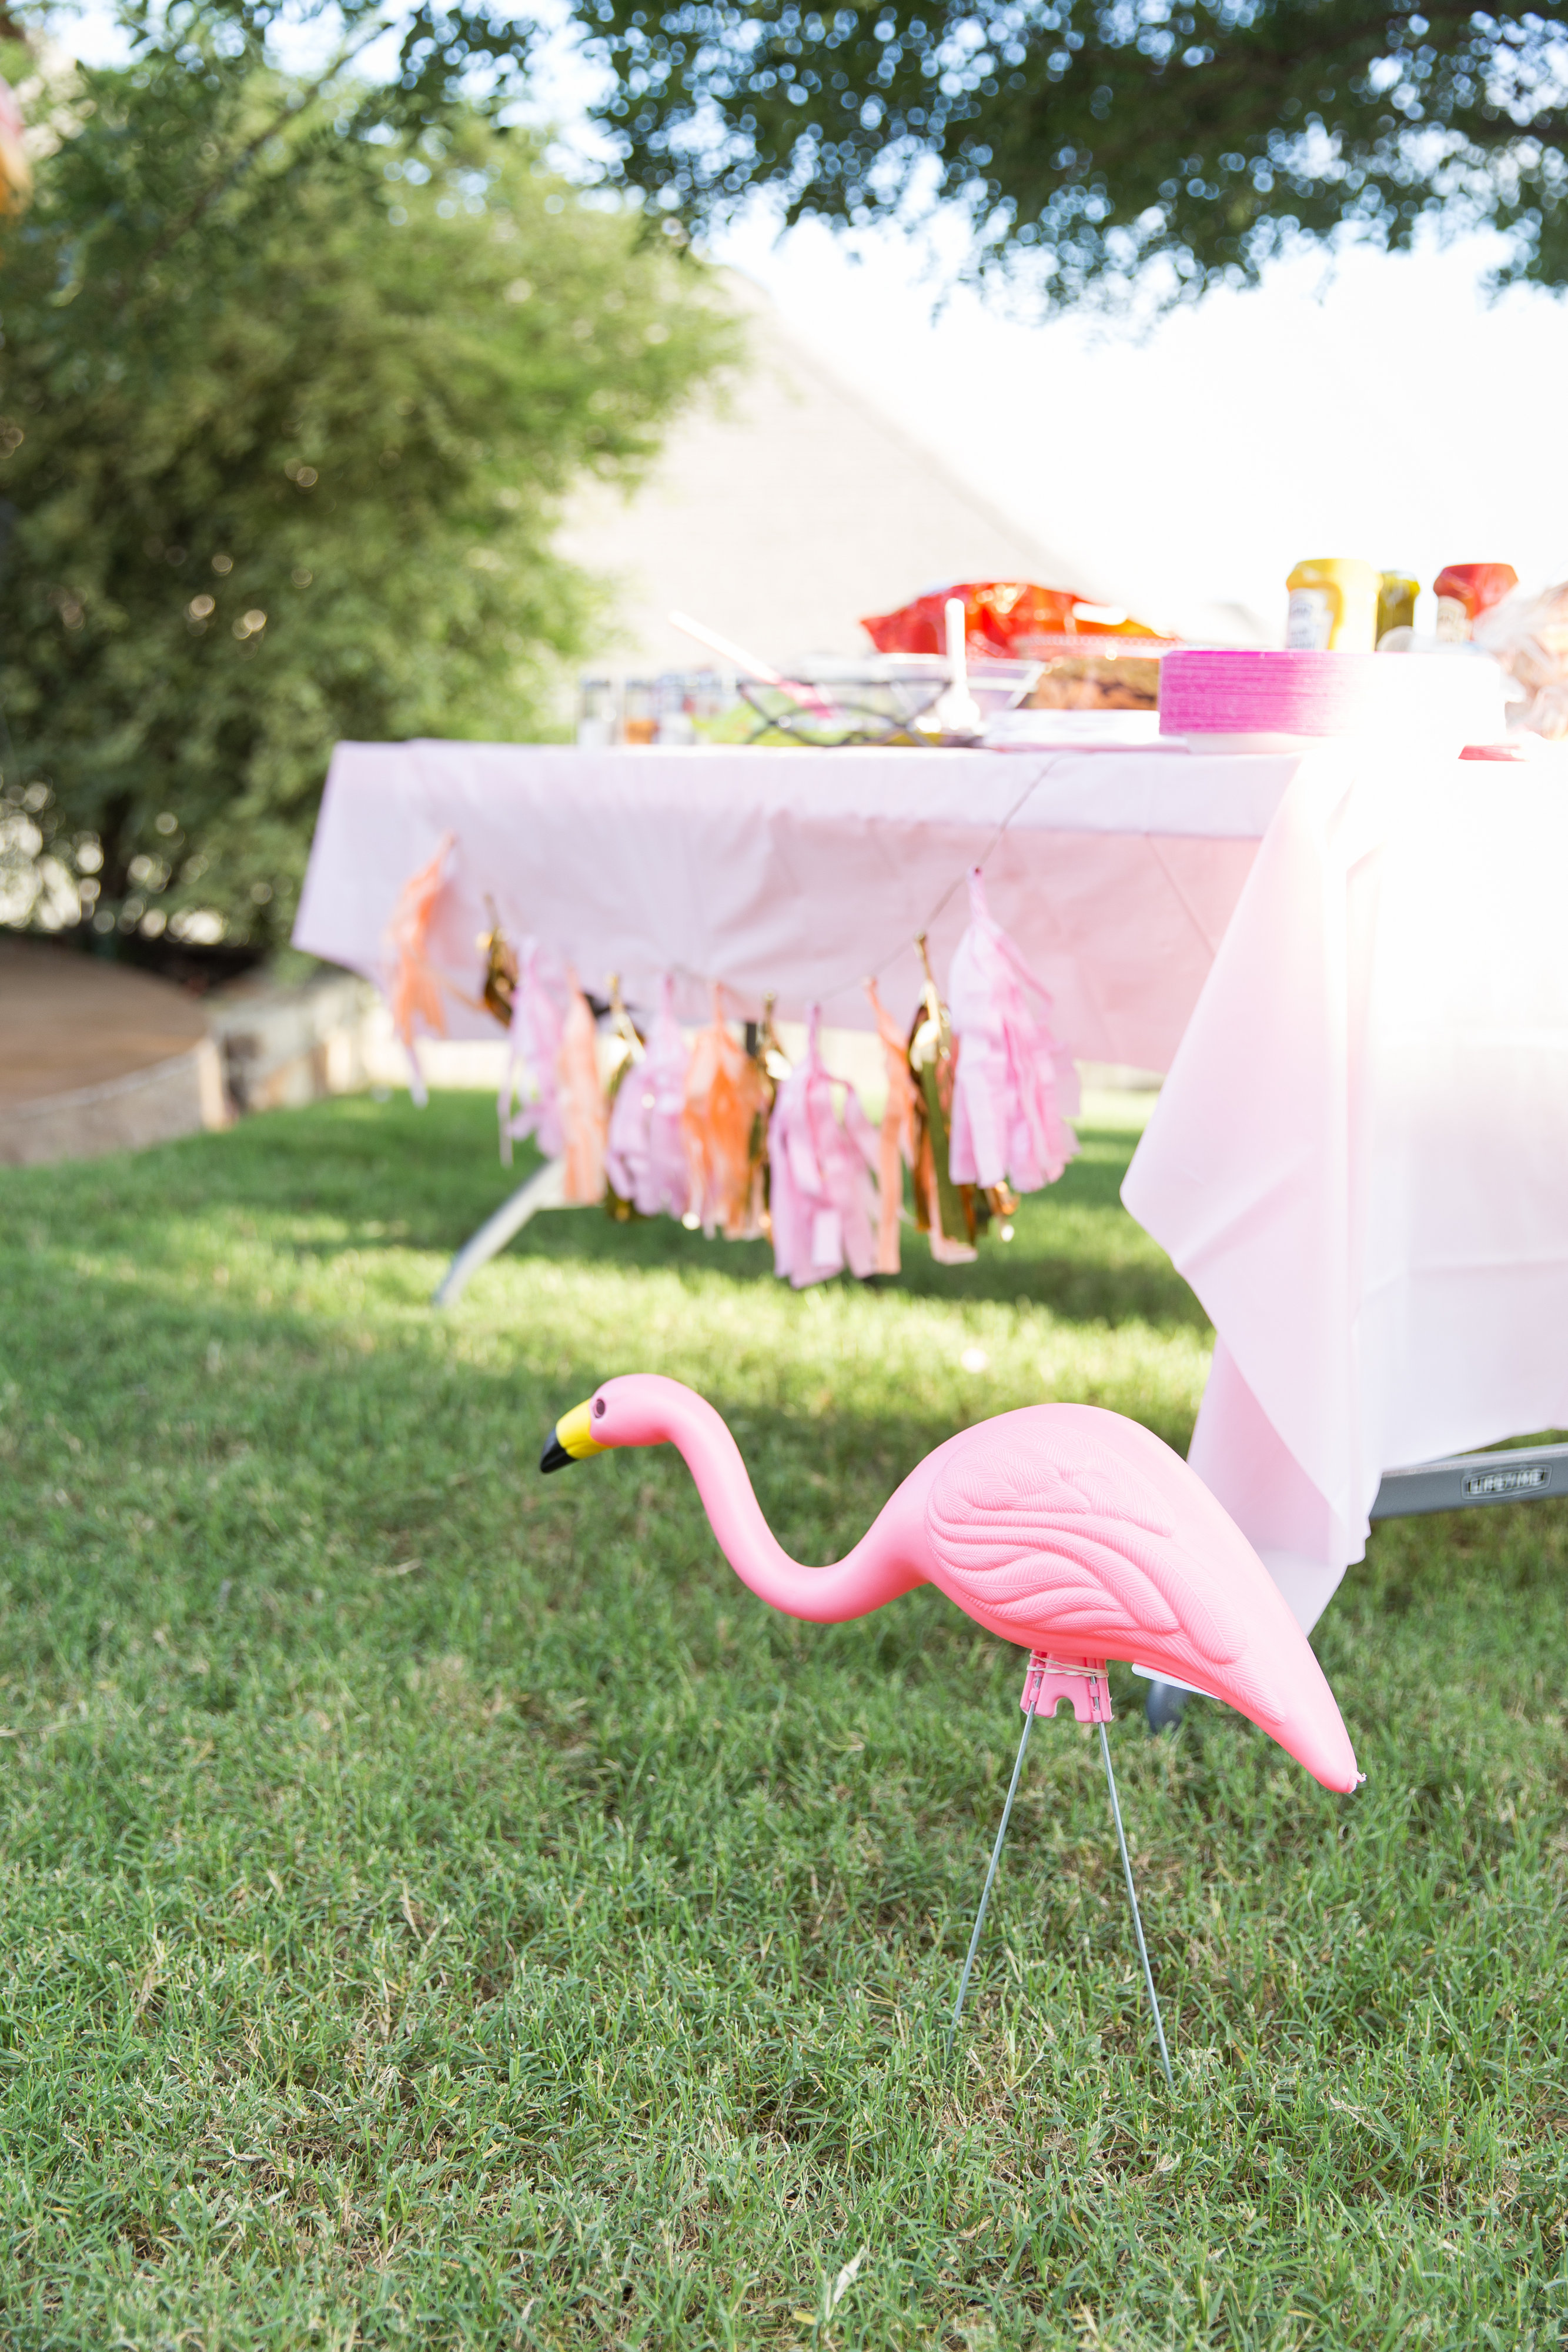 View More: http://margodawnphotography.pass.us/flamingo-fling